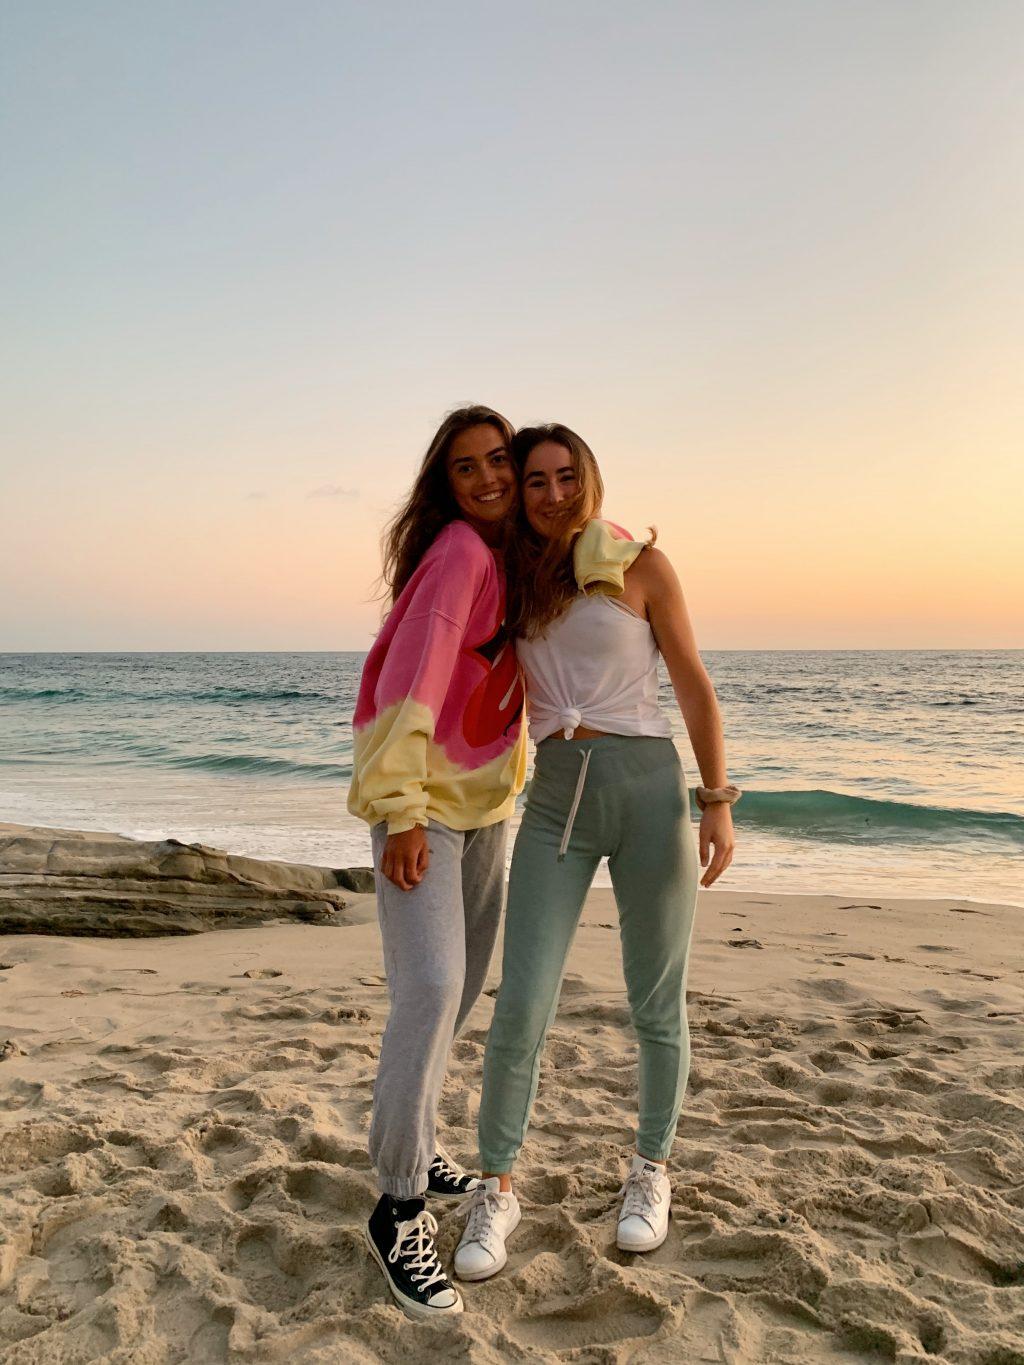 Ianni enjoys the sunset in Laguna Beach, Calif., with her friend Sophia in August. Ianni said the beach is her happy place and is where she feels most connected to God.